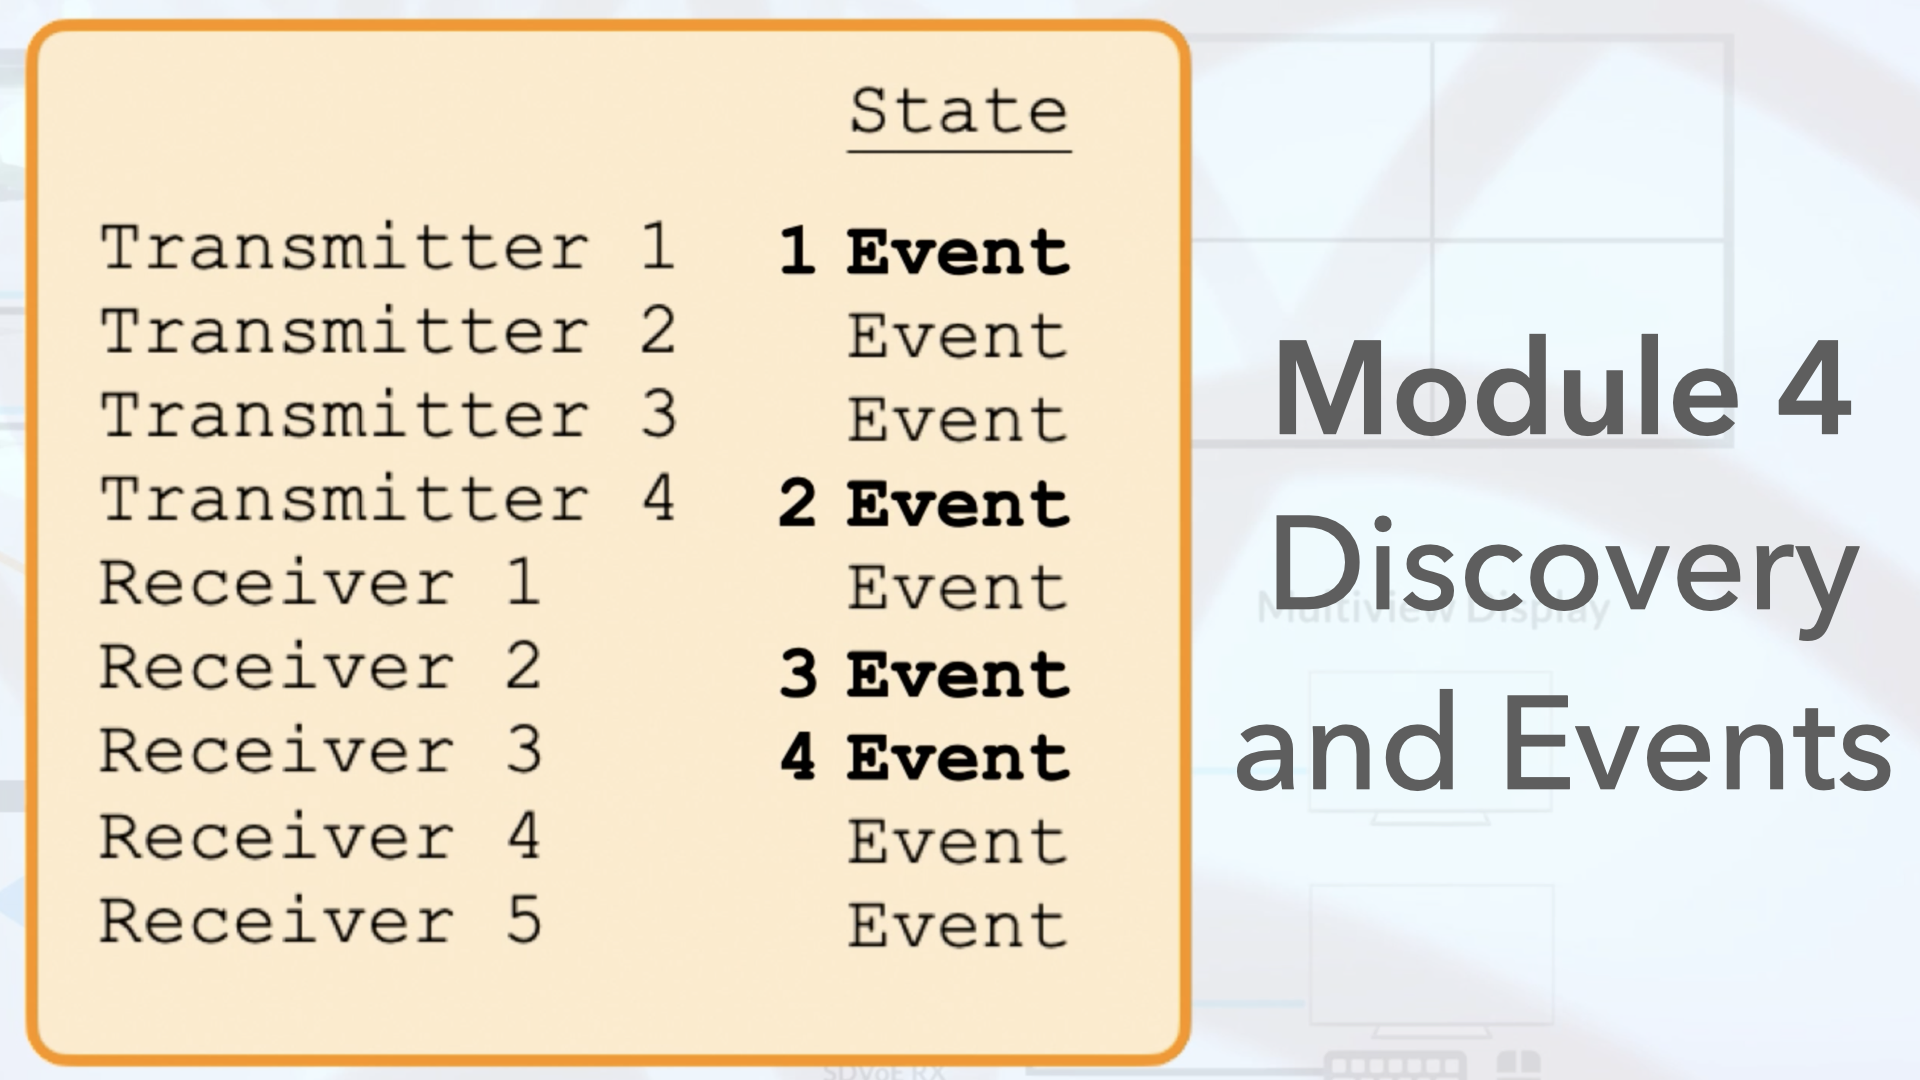 Module 4 - Discovery and events